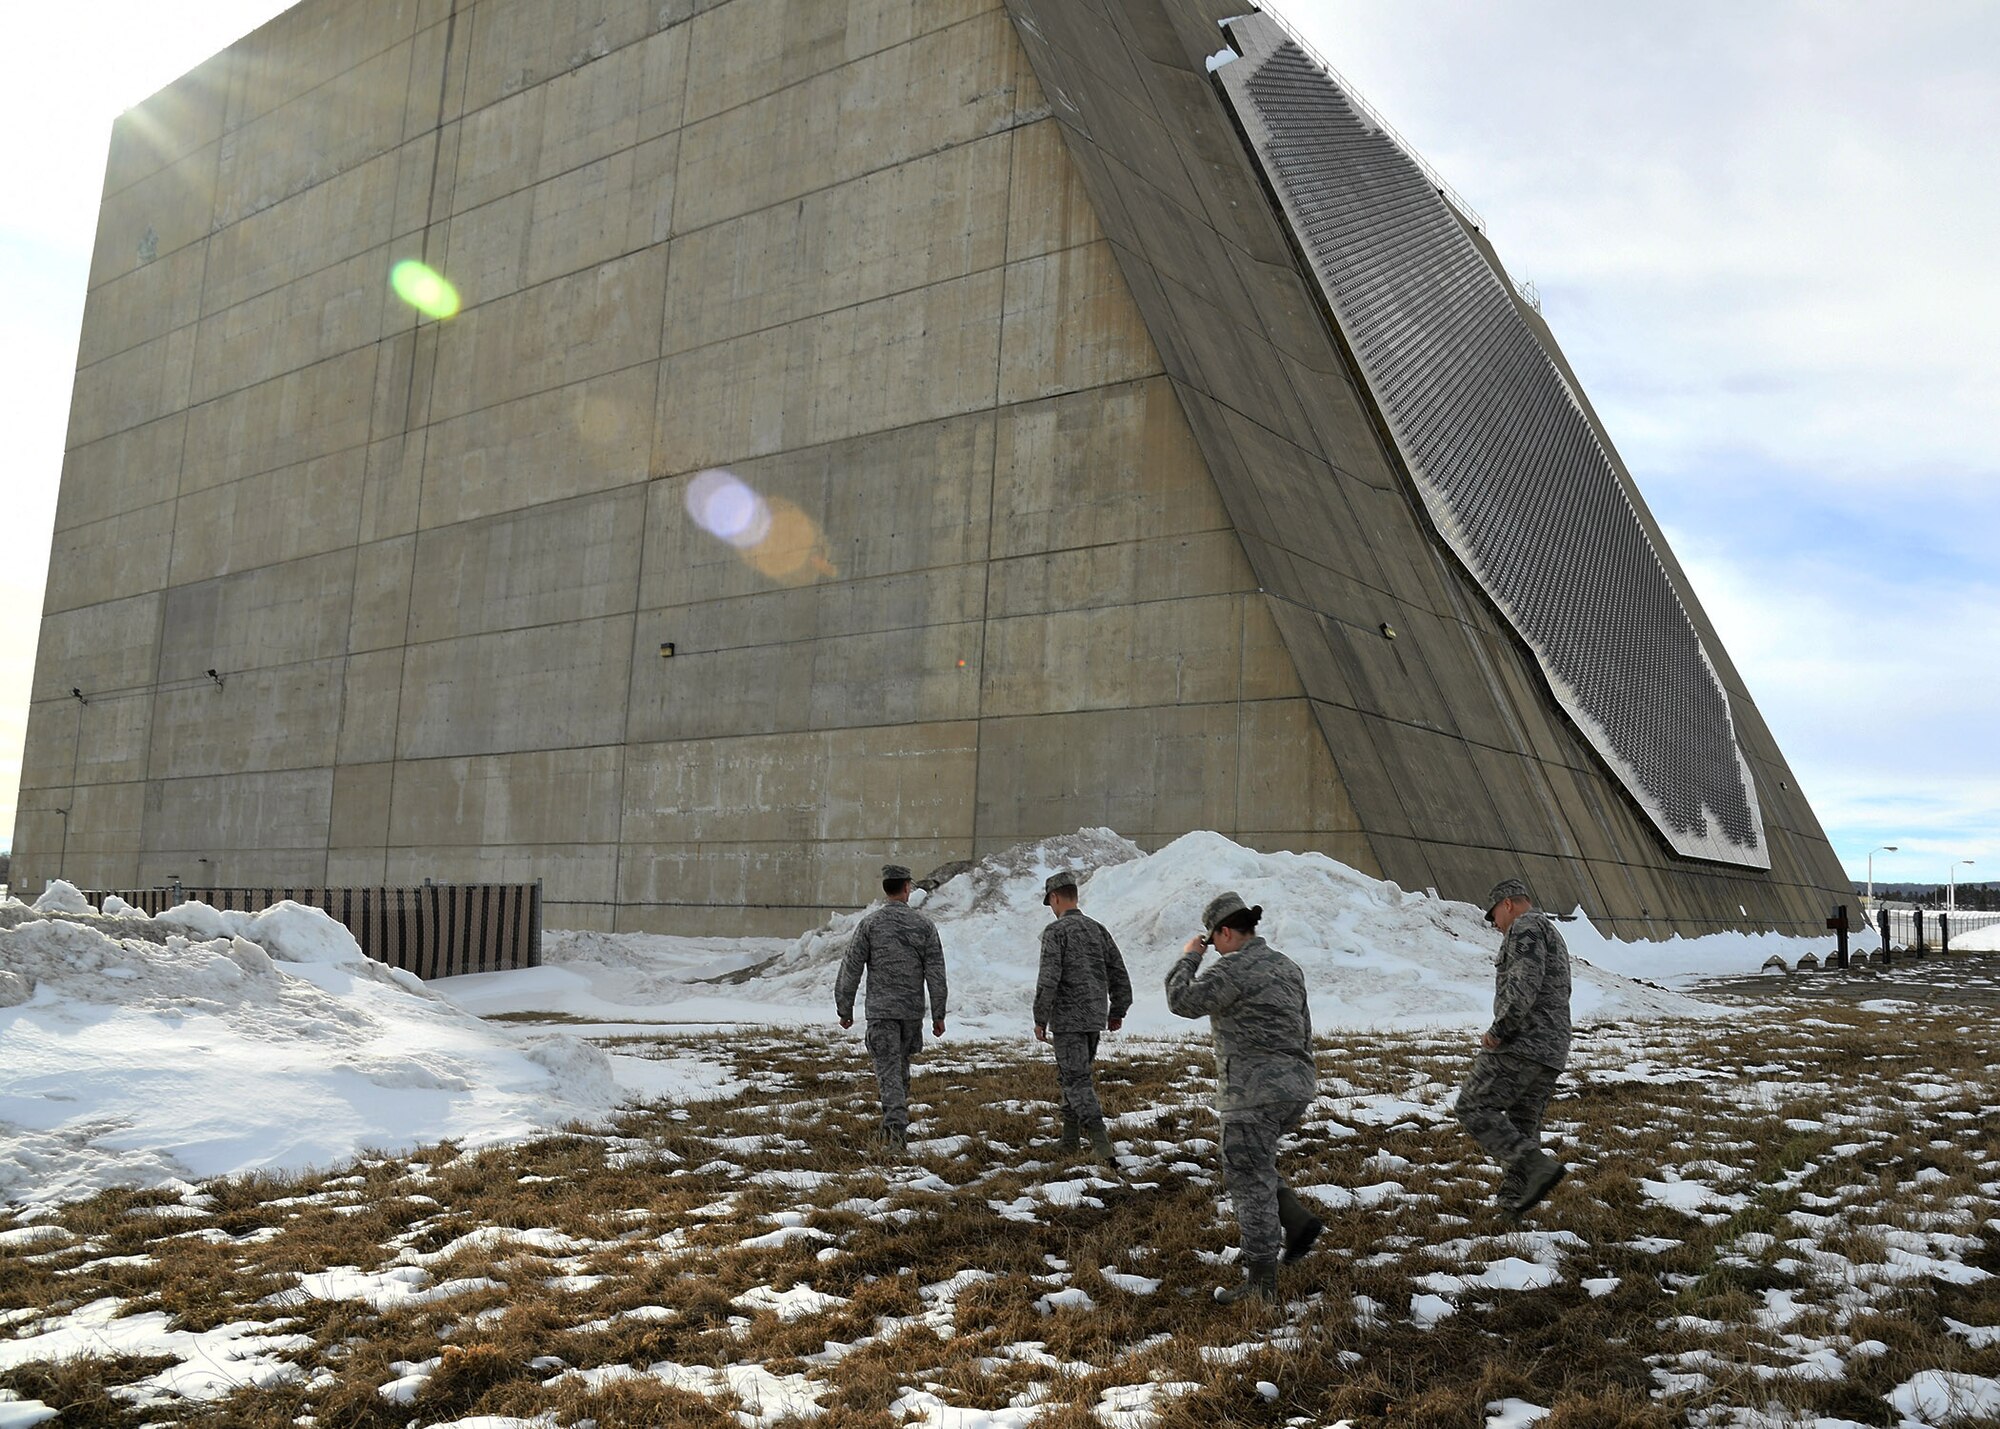 Maj. Gen. Dondi E. Costin, U.S. Air Force Chief of Chaplains, walks in front of the Perimeter Acquisition Radar Characterization System Feb. 16, 2017, on Cavalier Air Force Station, North Dakota. Costin met with Airmen stationed at Cavalier AFS and spoke with them about spiritual fitness. (U.S. Air Force photo by Senior Airman Ryan Sparks)